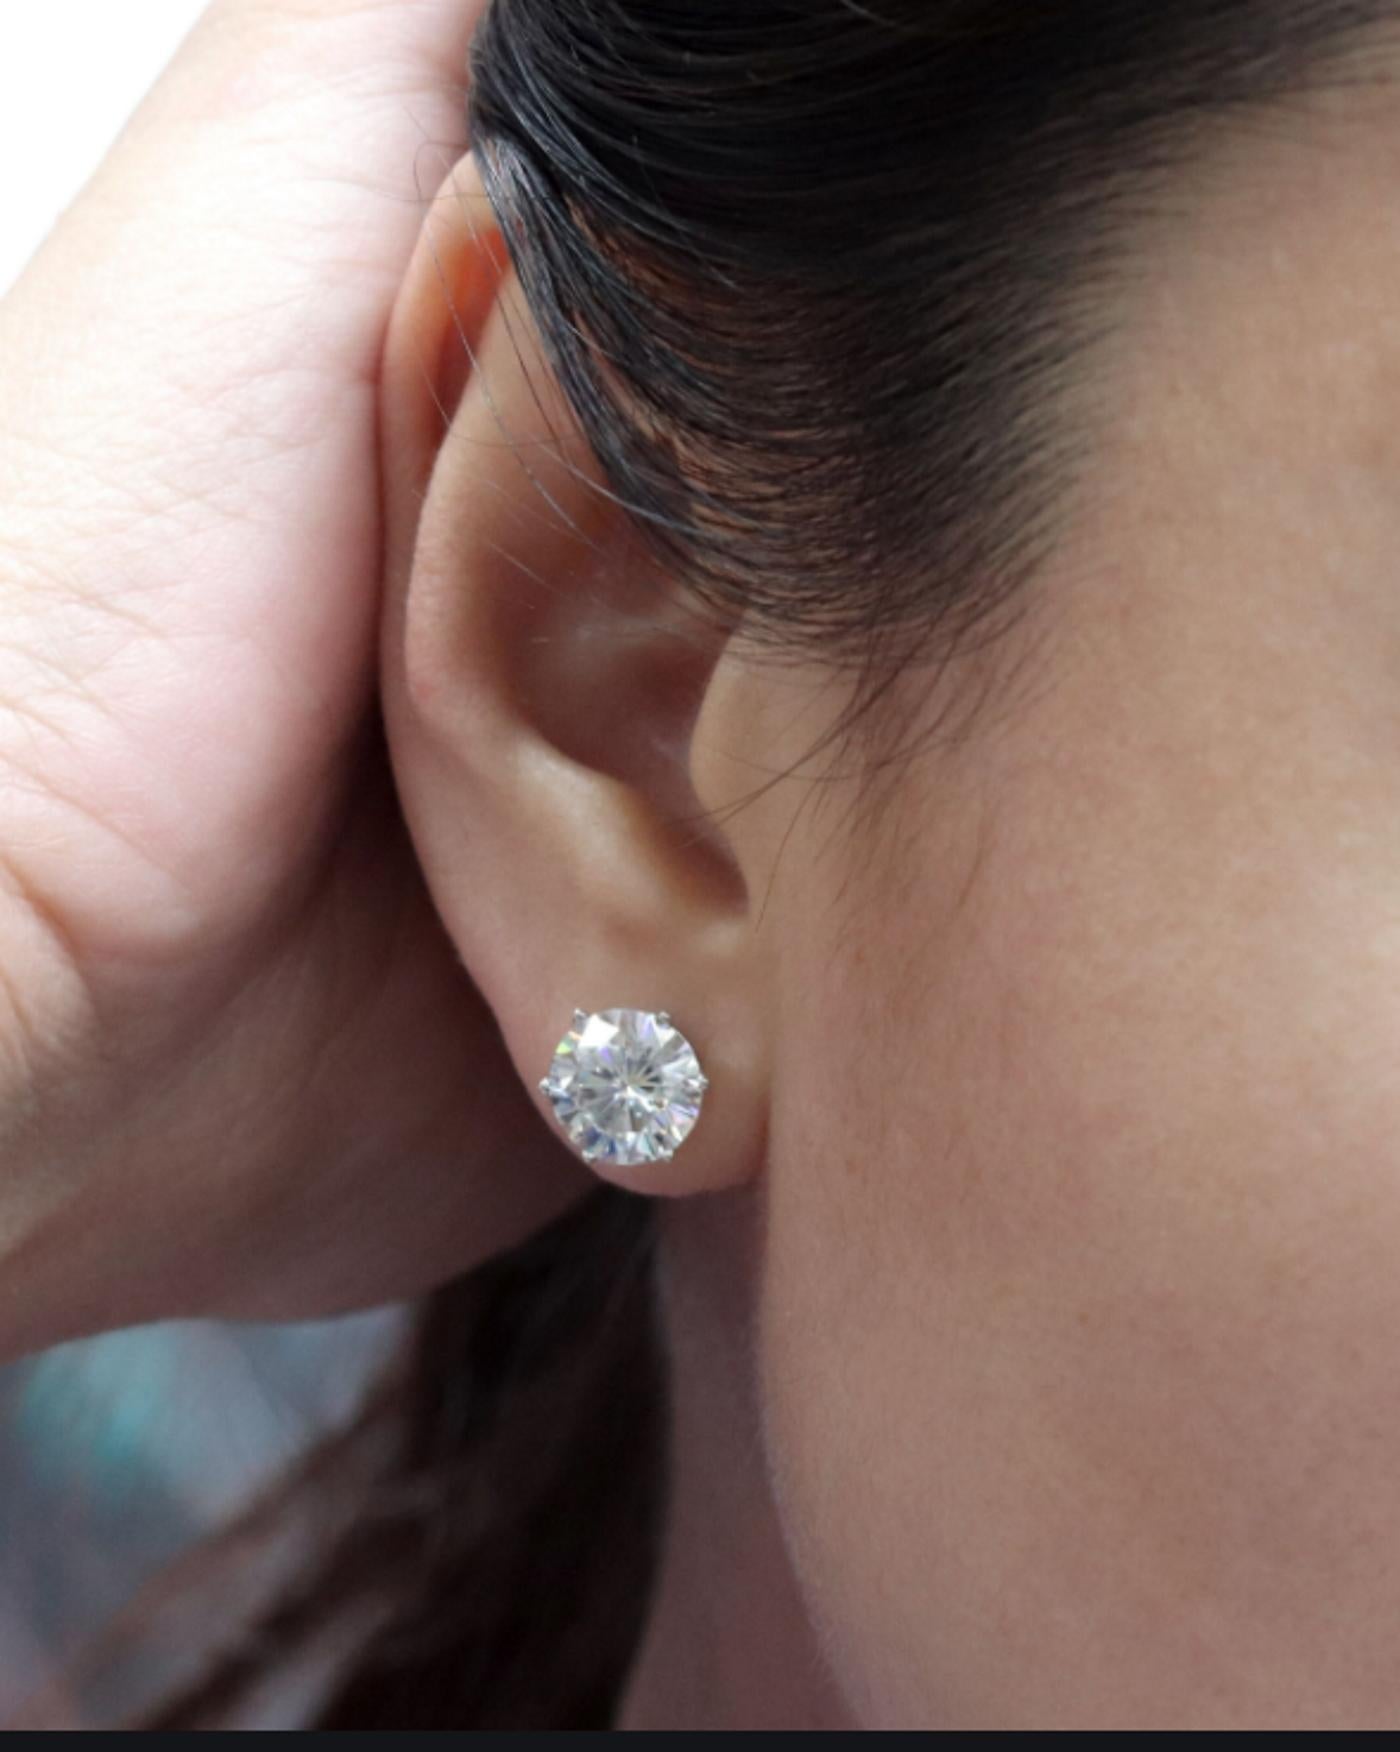 This two diamond studs are 100% completely eye clean and are both very beautiful with excellent cut and polish so they are full of brilliance and high performing.
